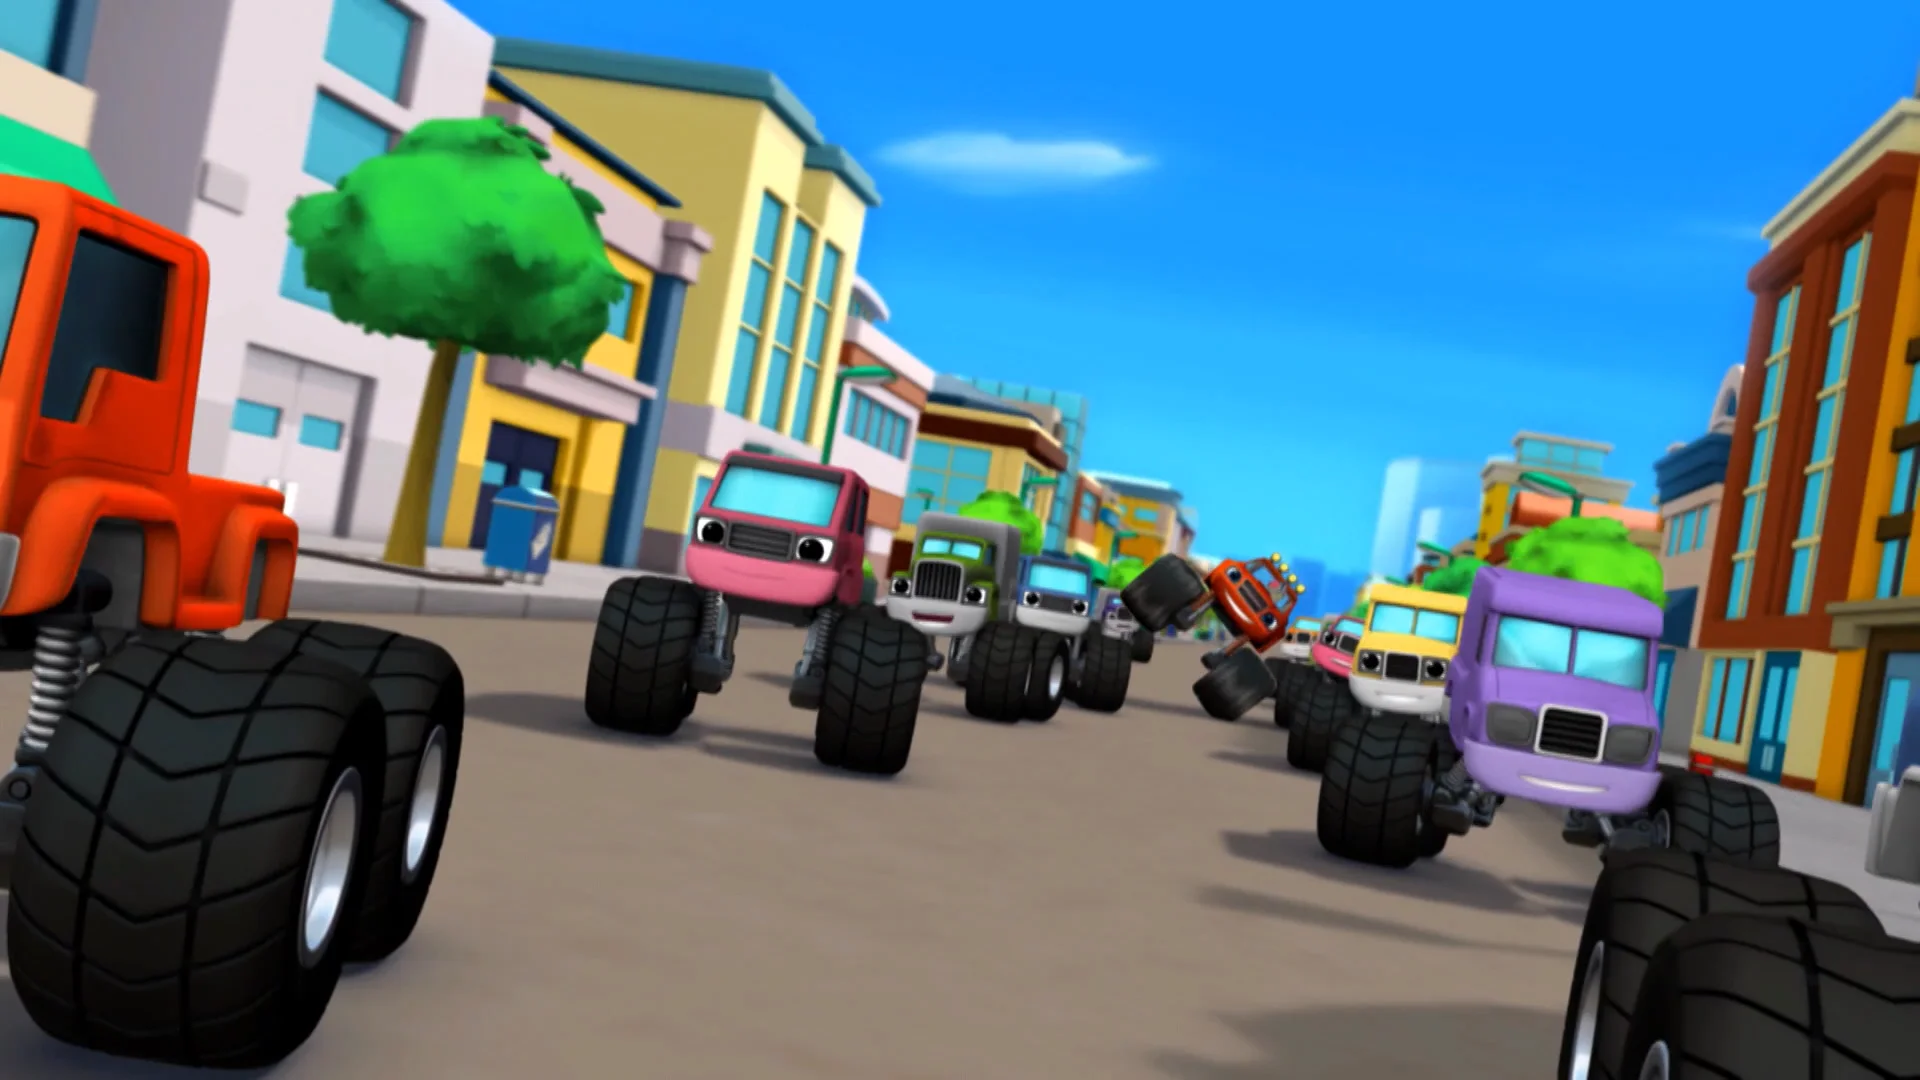 Blaze and the Monster Machines on Vimeo